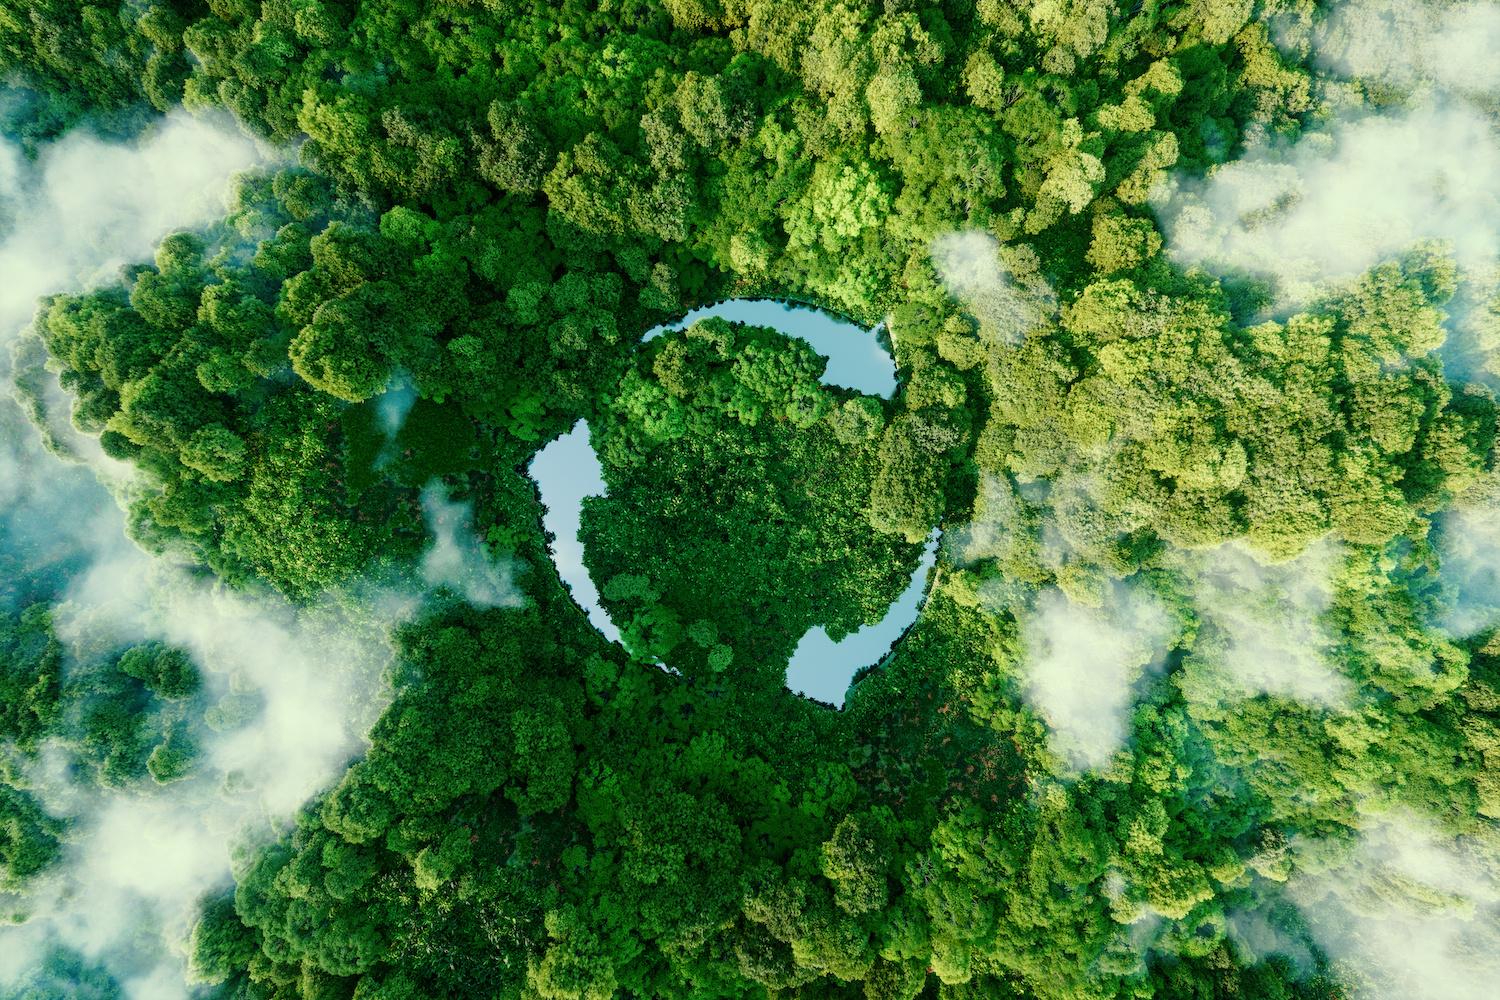 Abstract lakes that look like a recycling symbol in a jungle - symbolizing the circular economy